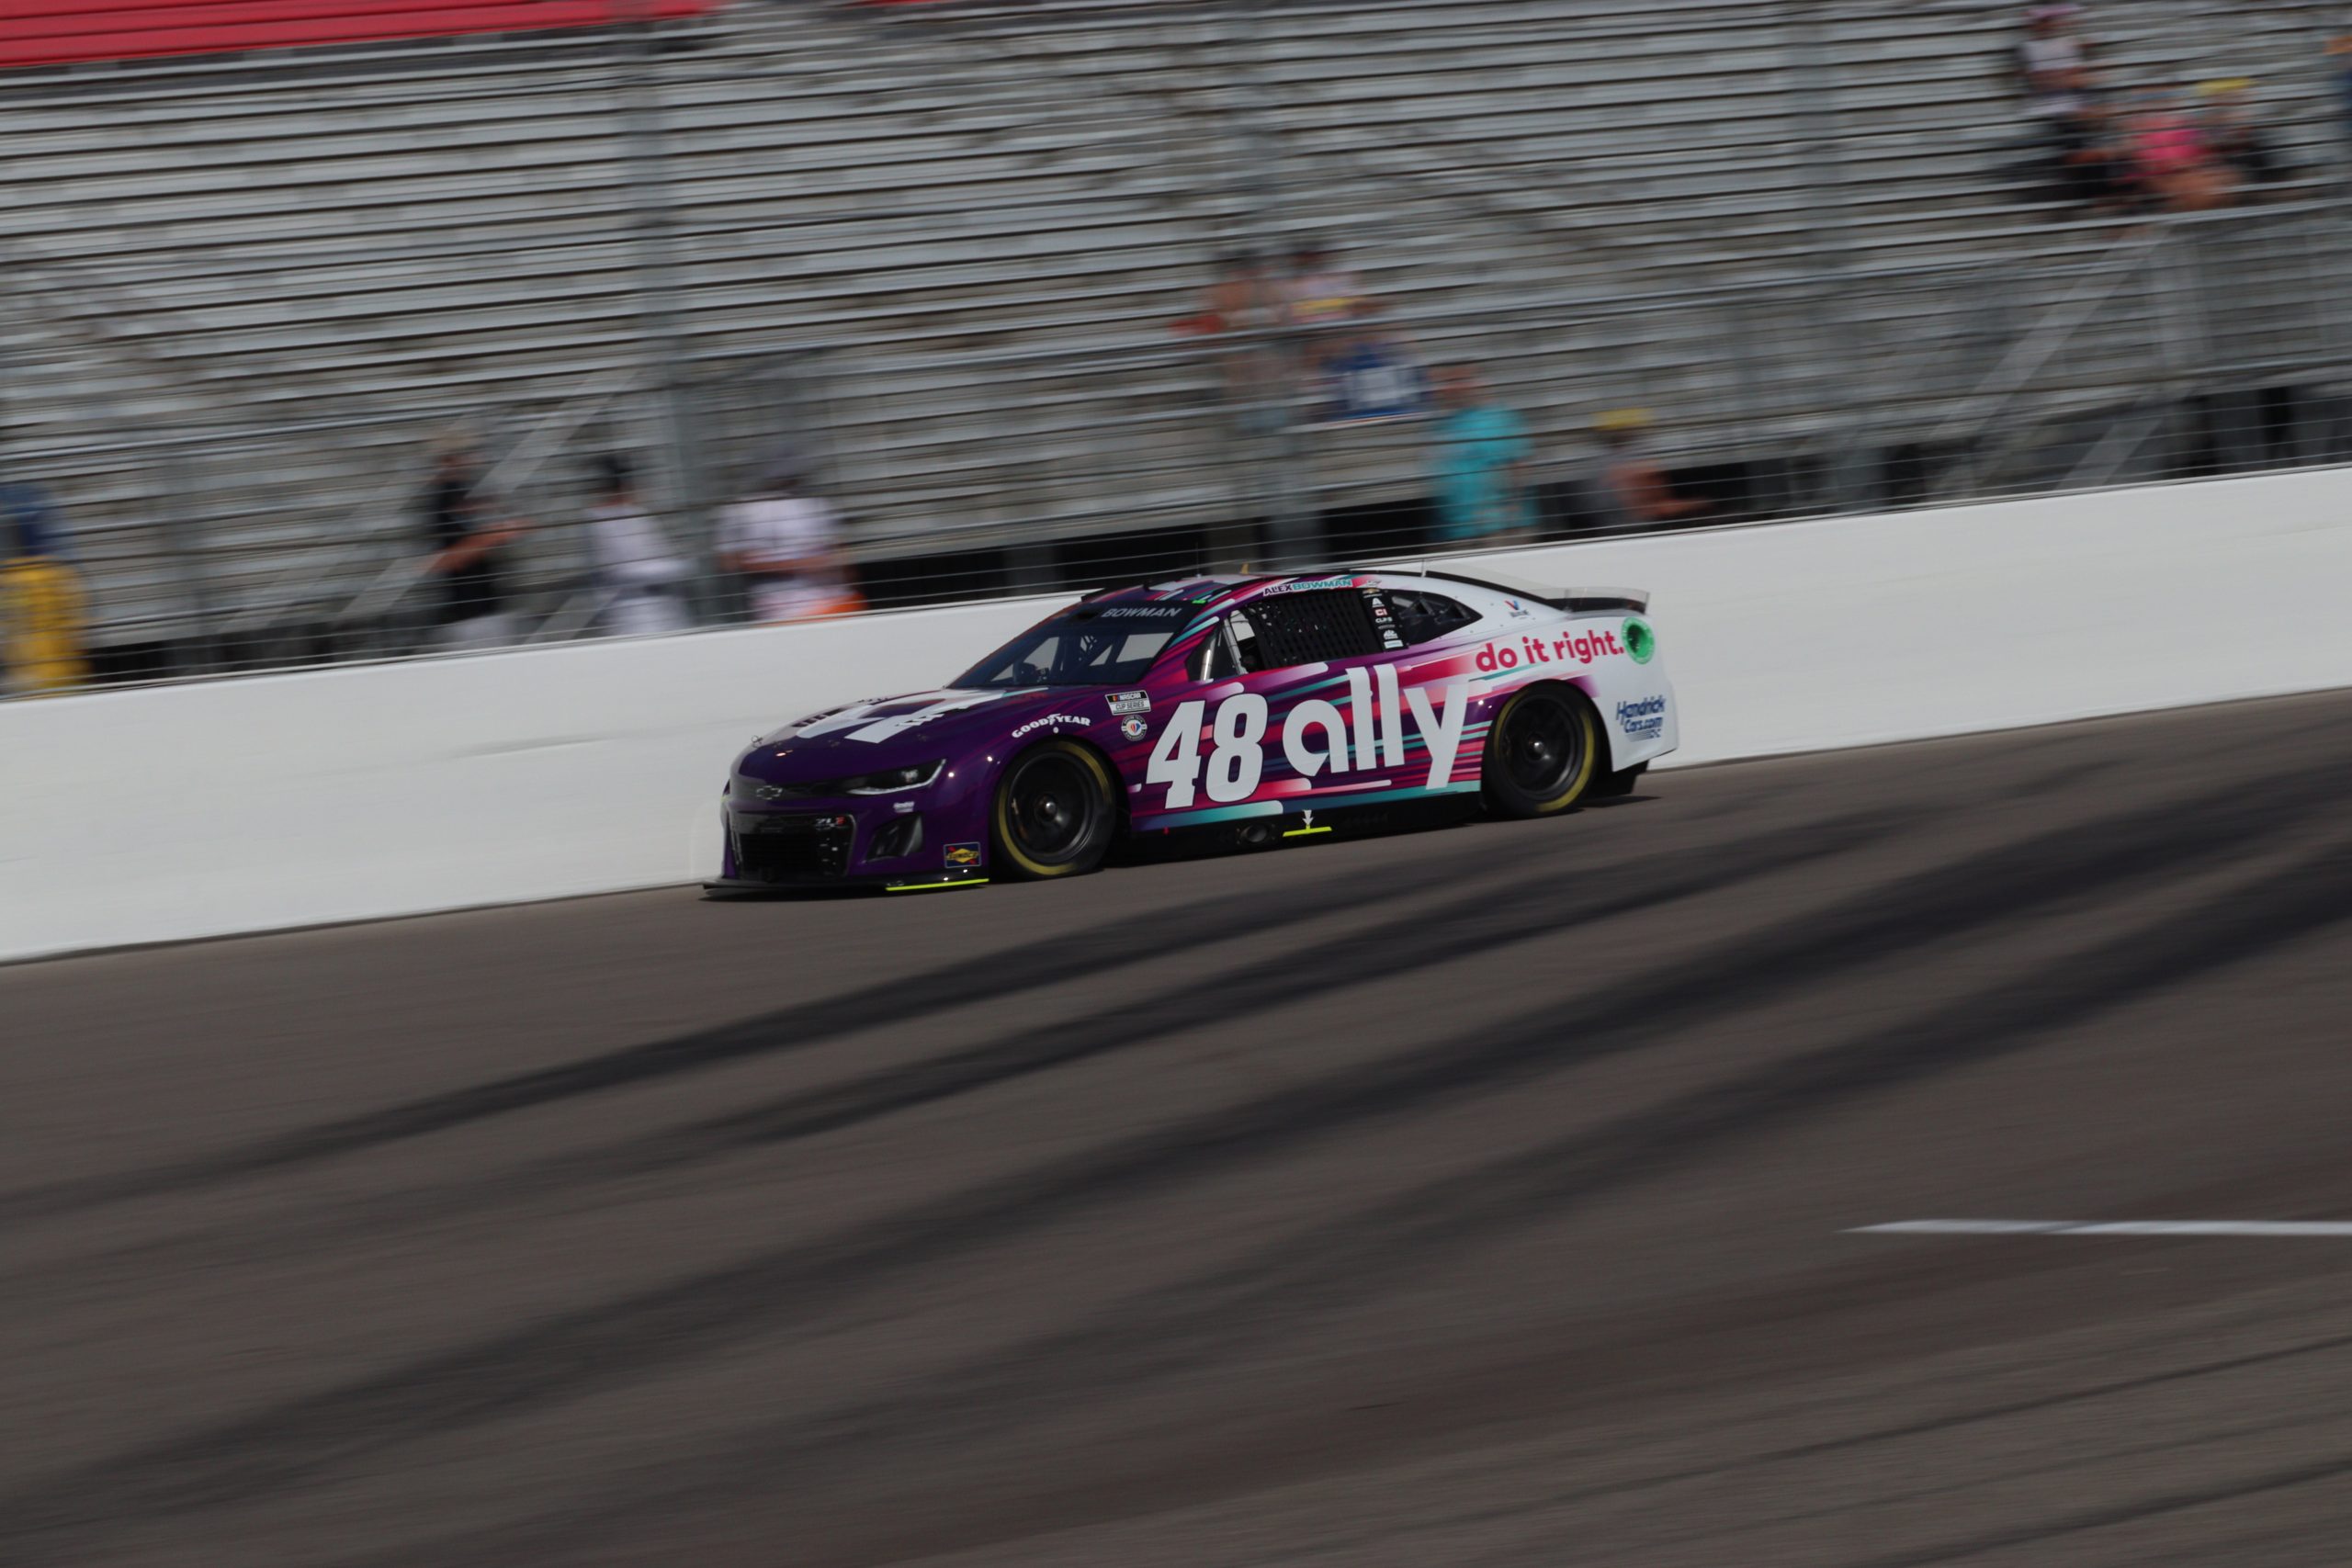 Alex Bowman will decrease his dirt track efforts to concentrate more with his No. 48 Ally Chevrolet Camaro efforts. (Photo: Bobby Krug | The Podium Finish)